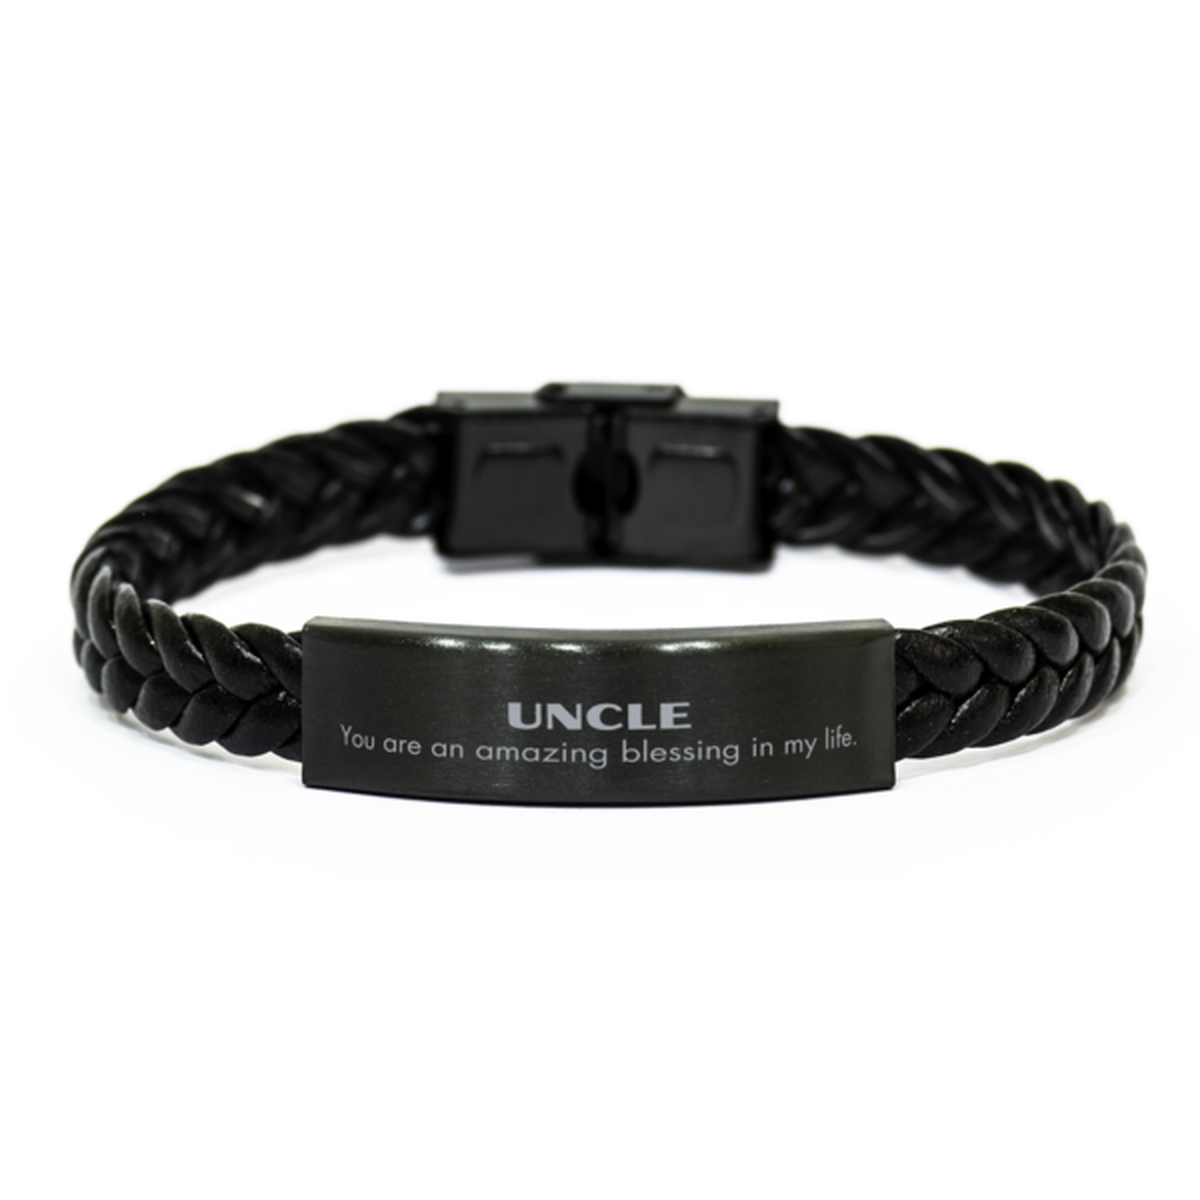 Uncle Braided Leather Bracelet, You are an amazing blessing in my life, Thank You Gifts For Uncle, Inspirational Birthday Christmas Unique Gifts For Uncle